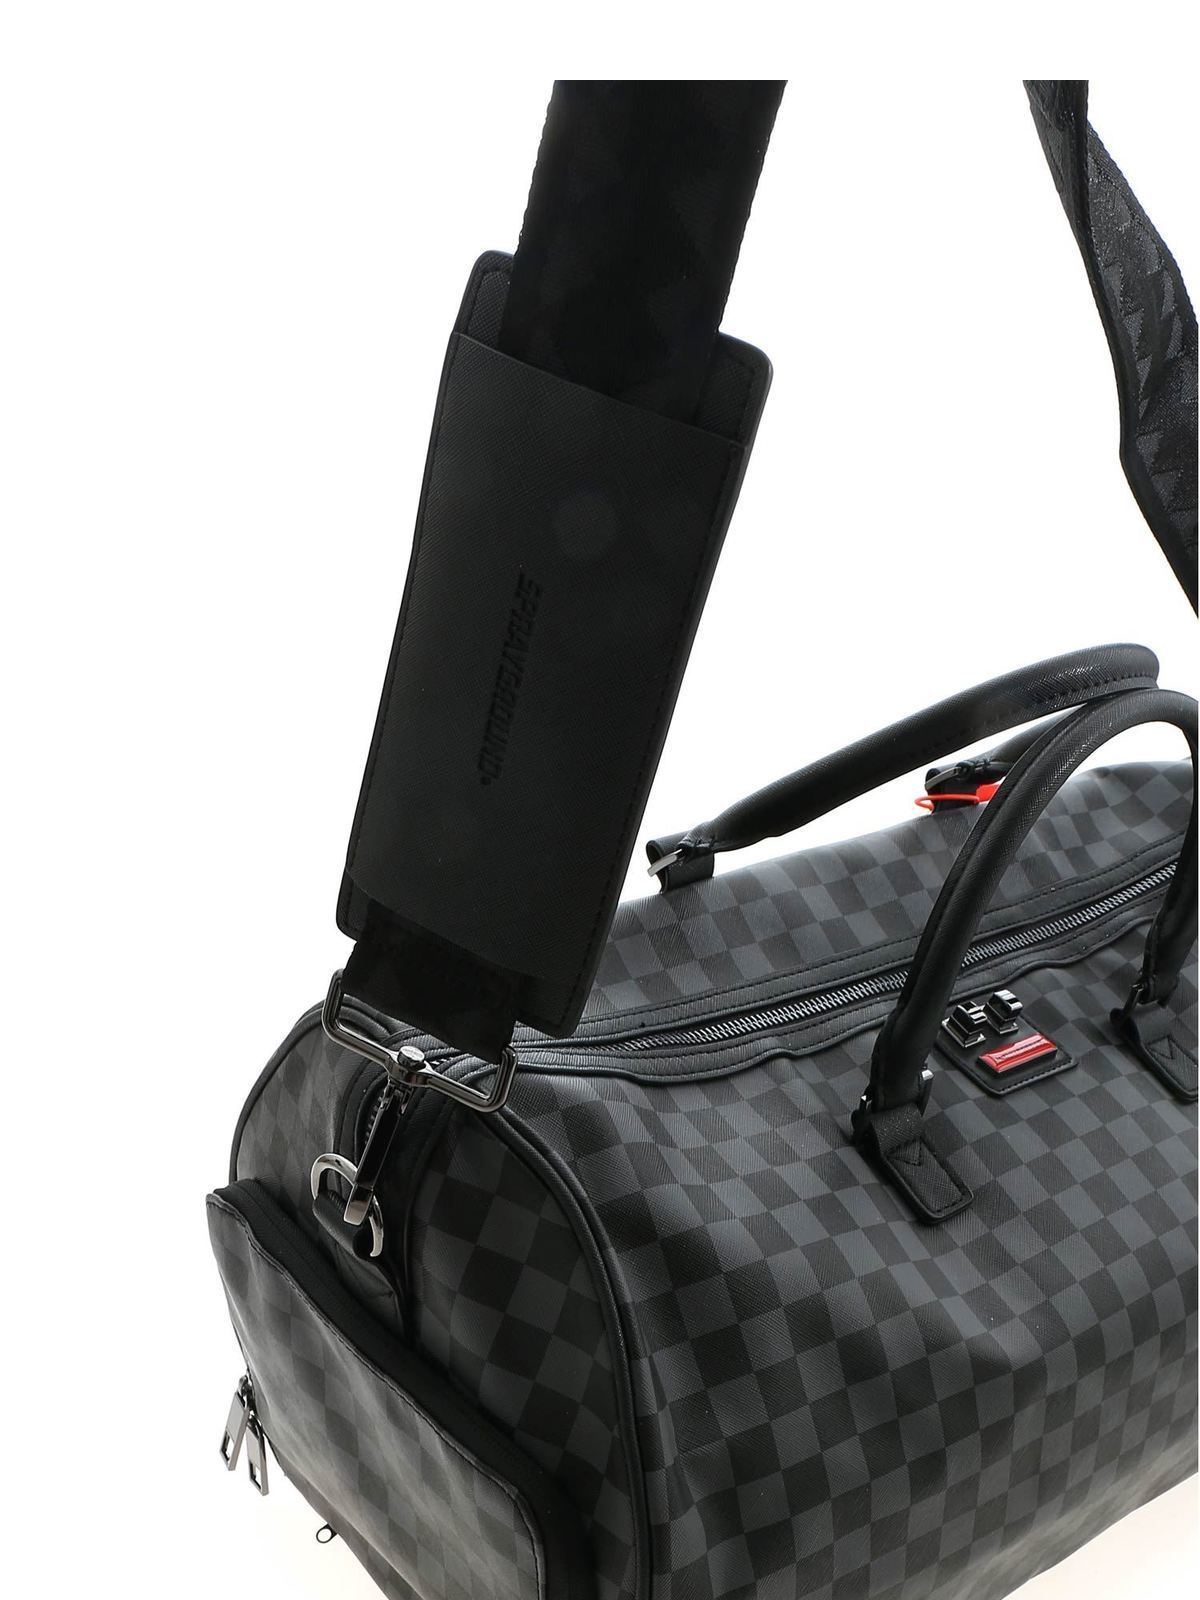 Luggage & Travel bags Sprayground - Henny duffle bag in black and grey -  910D3427NSZ